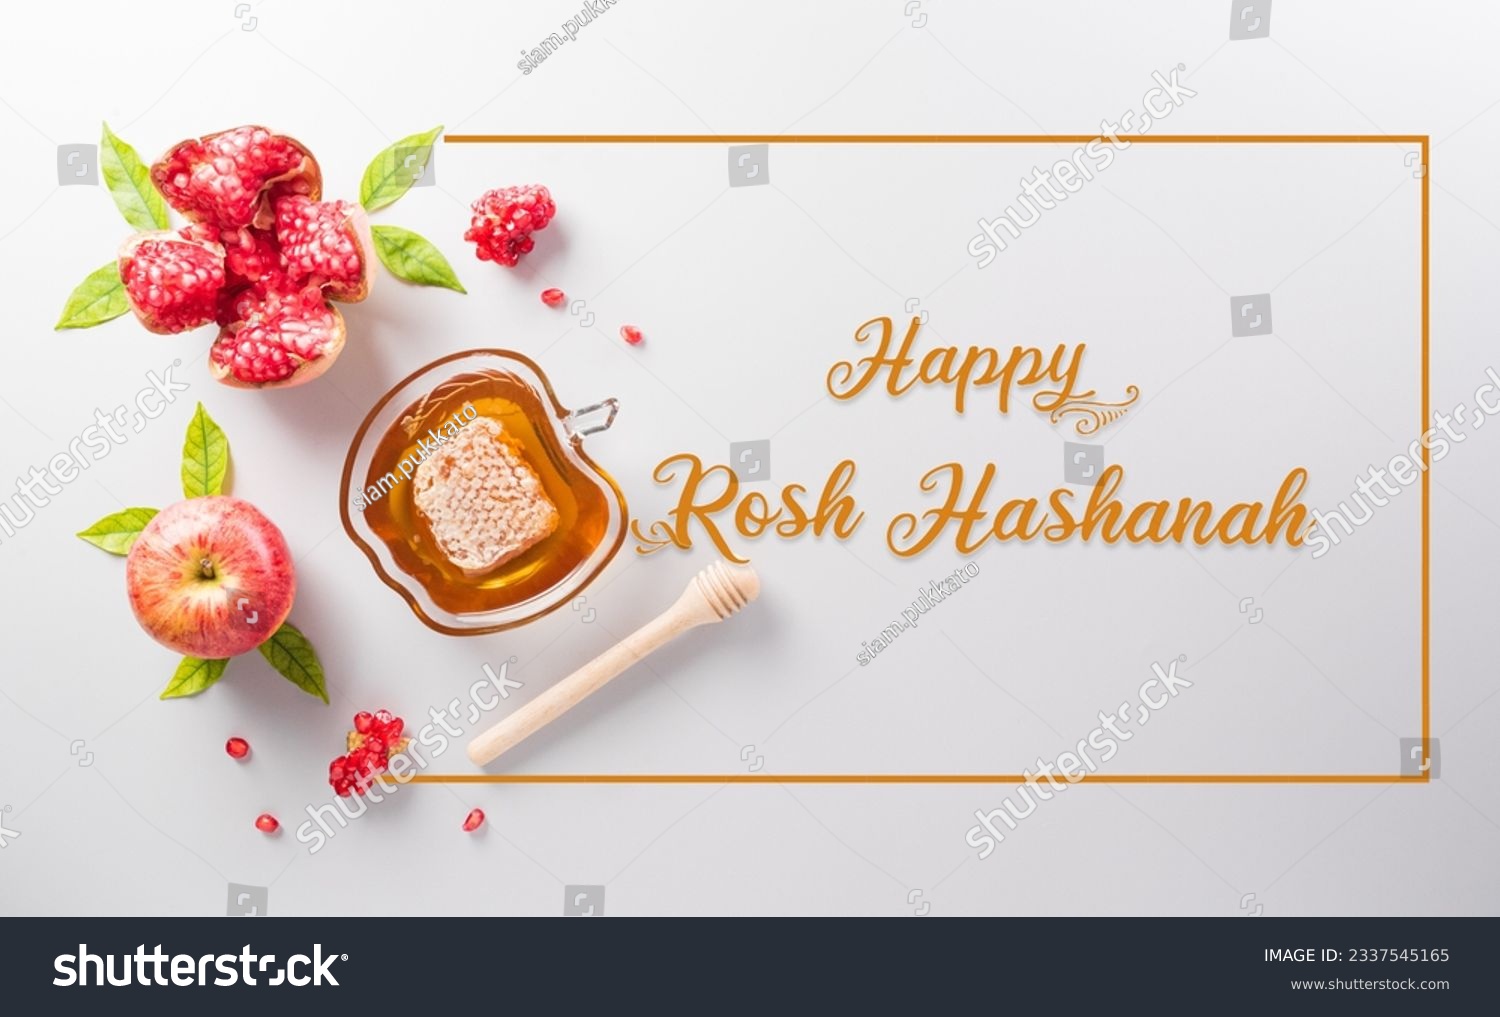 Rosh hashanah (jewish New Year holiday), Concept of traditional or religion symbols with the text on pastel background. #2337545165